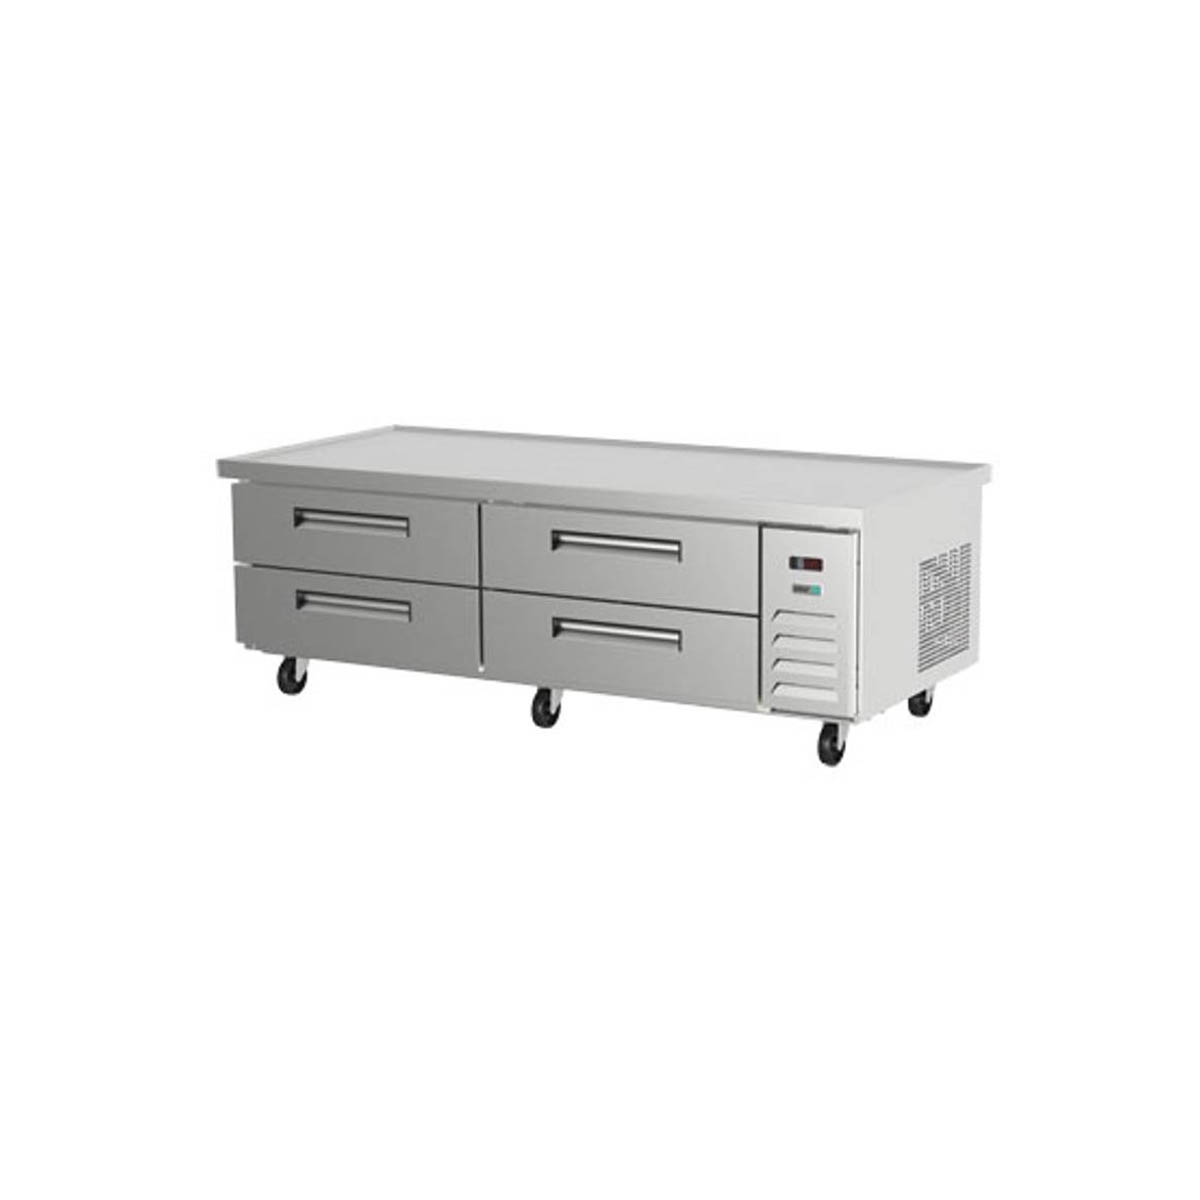 Asber ACBR-84 84″ 4 Drawers Chef Base Refrigerated Equipment Stand